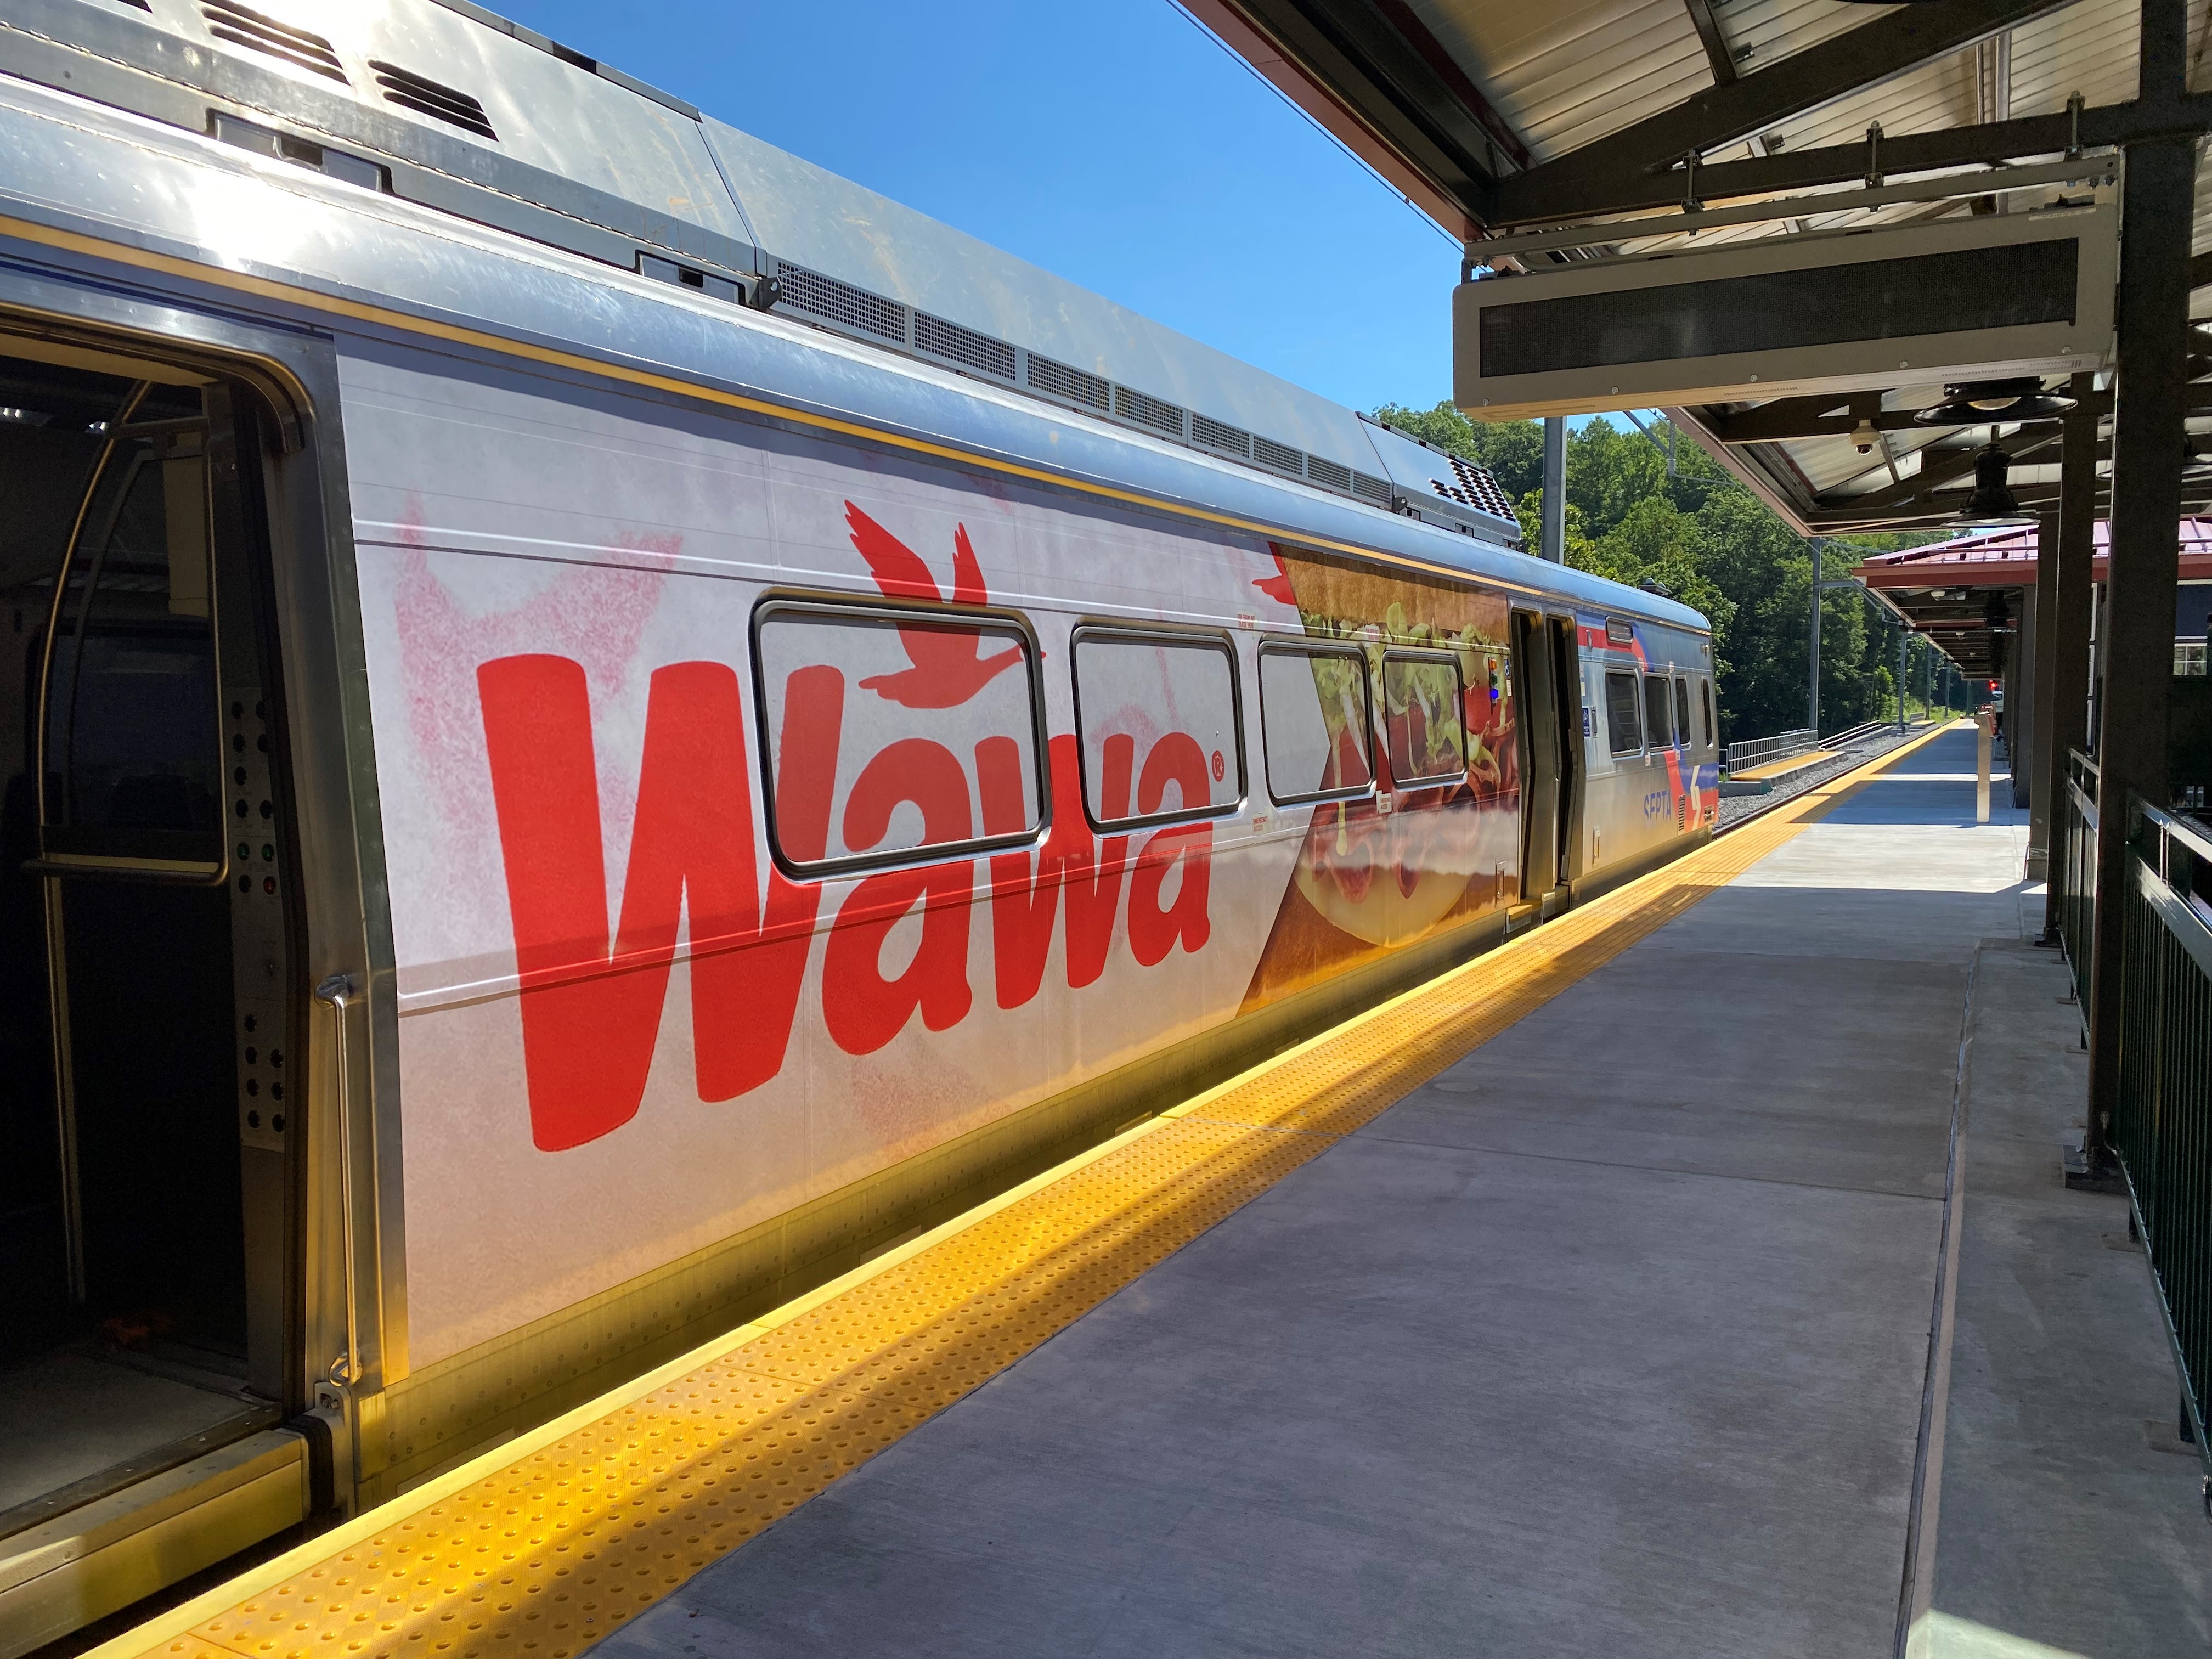 A SEPTA train wrapped in Wawa advertising